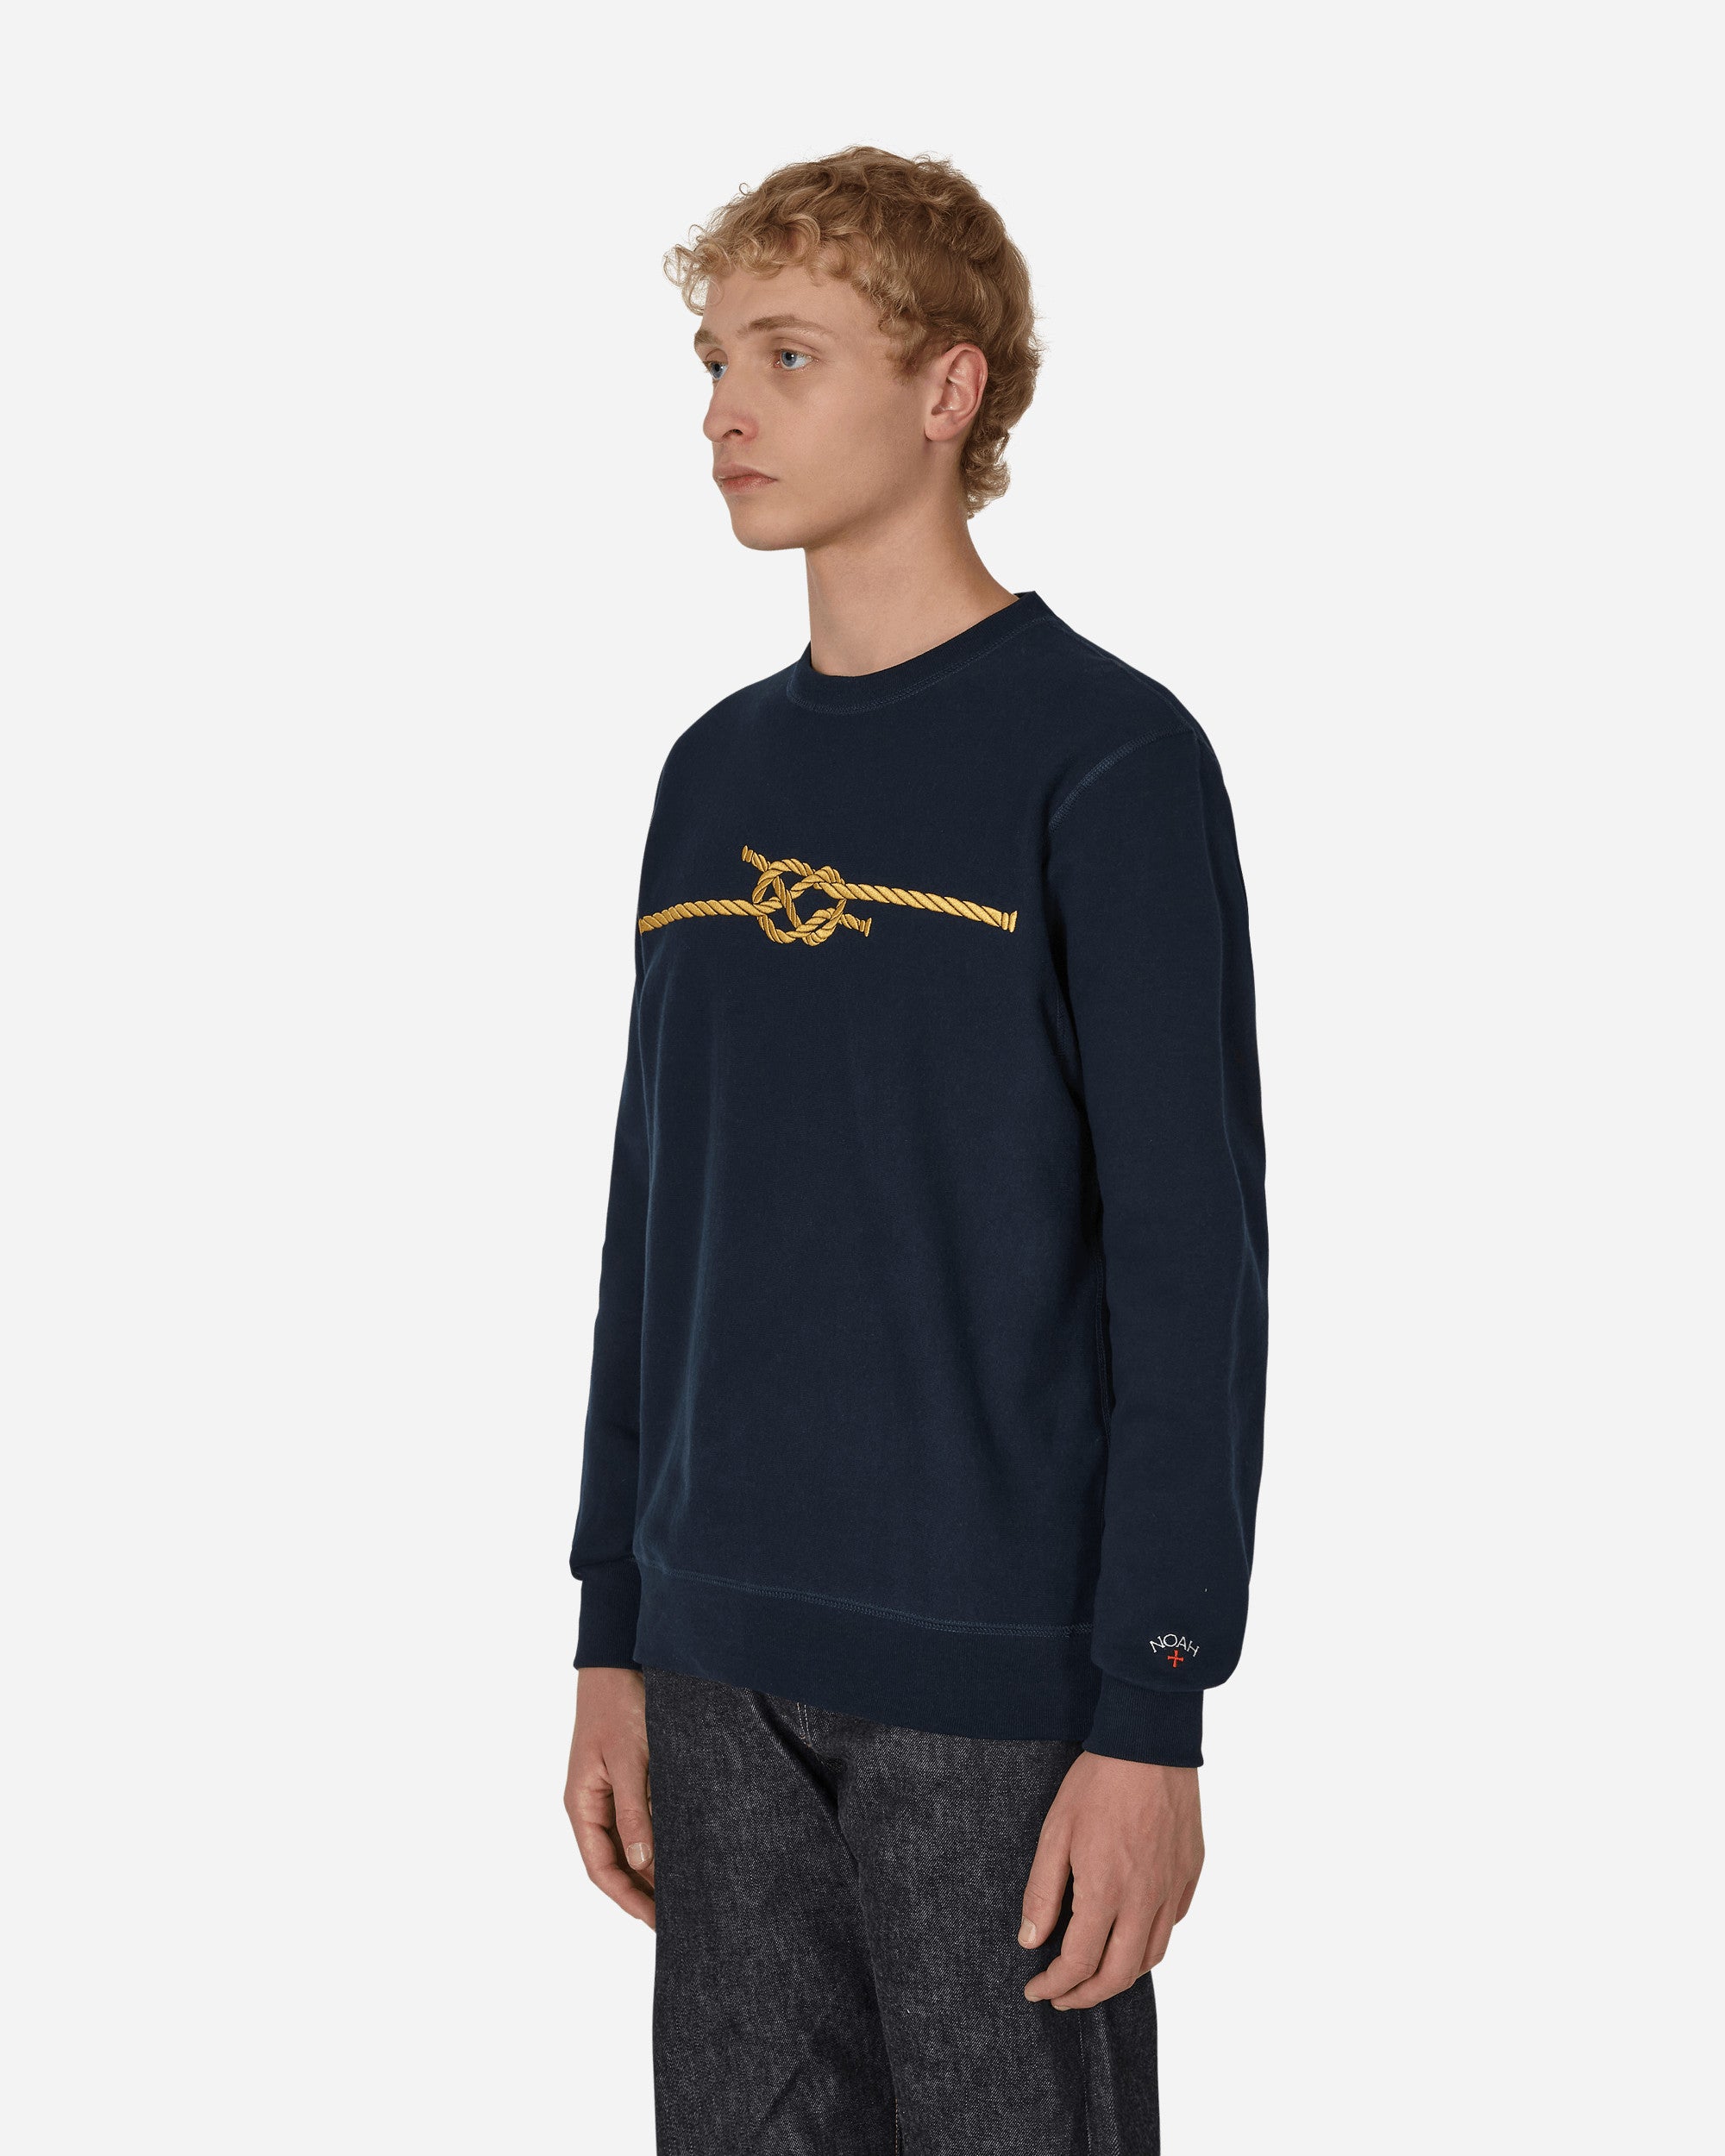 Noah Knot Crewneck Navy  Knitwears Sweaters SS070FW22 NVY